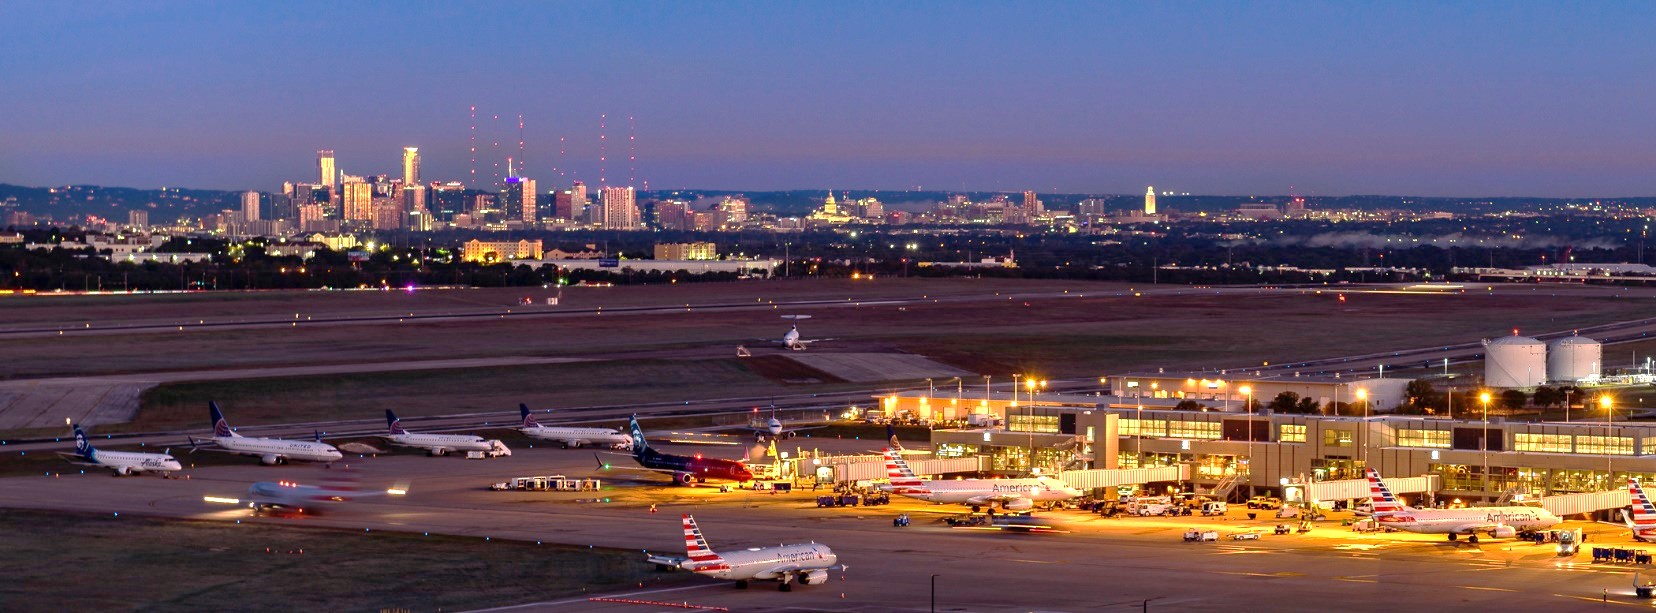 terminal with downtown morning shot-credit Austin Pro Photo